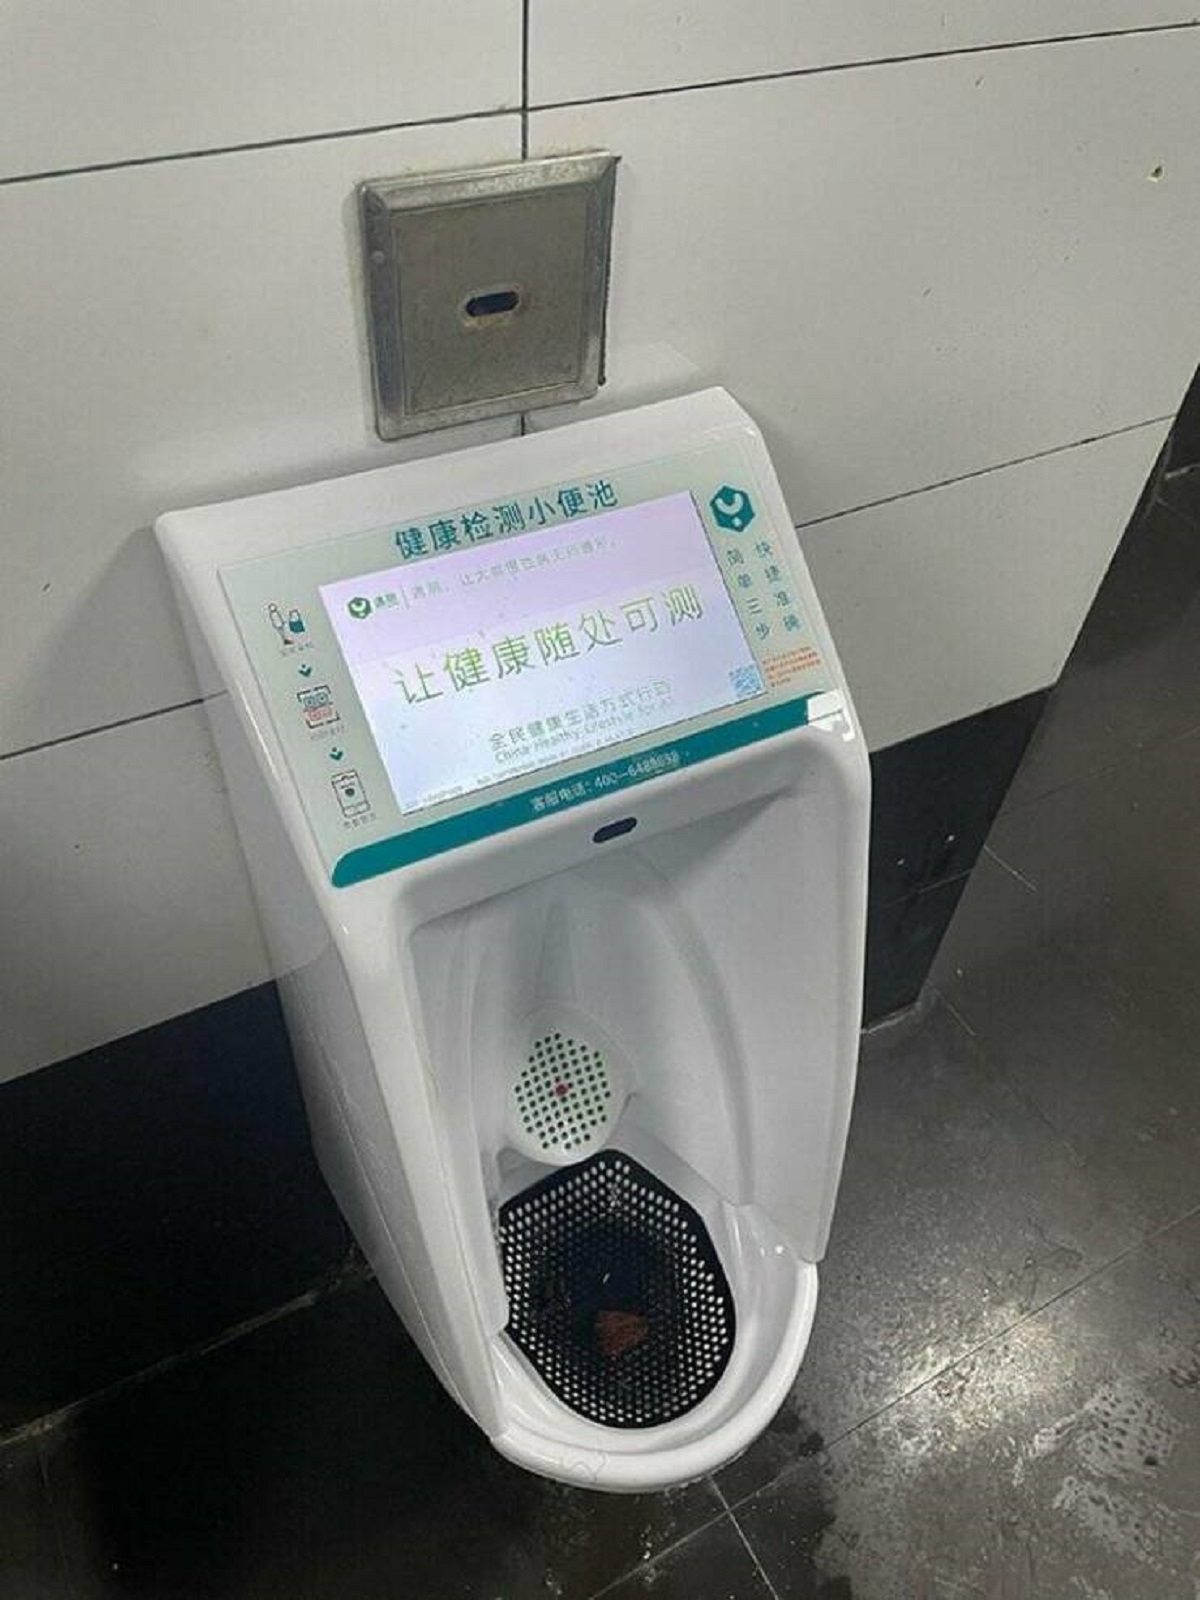 "In China, urinals can conduct a health check-up for you, for a fee."